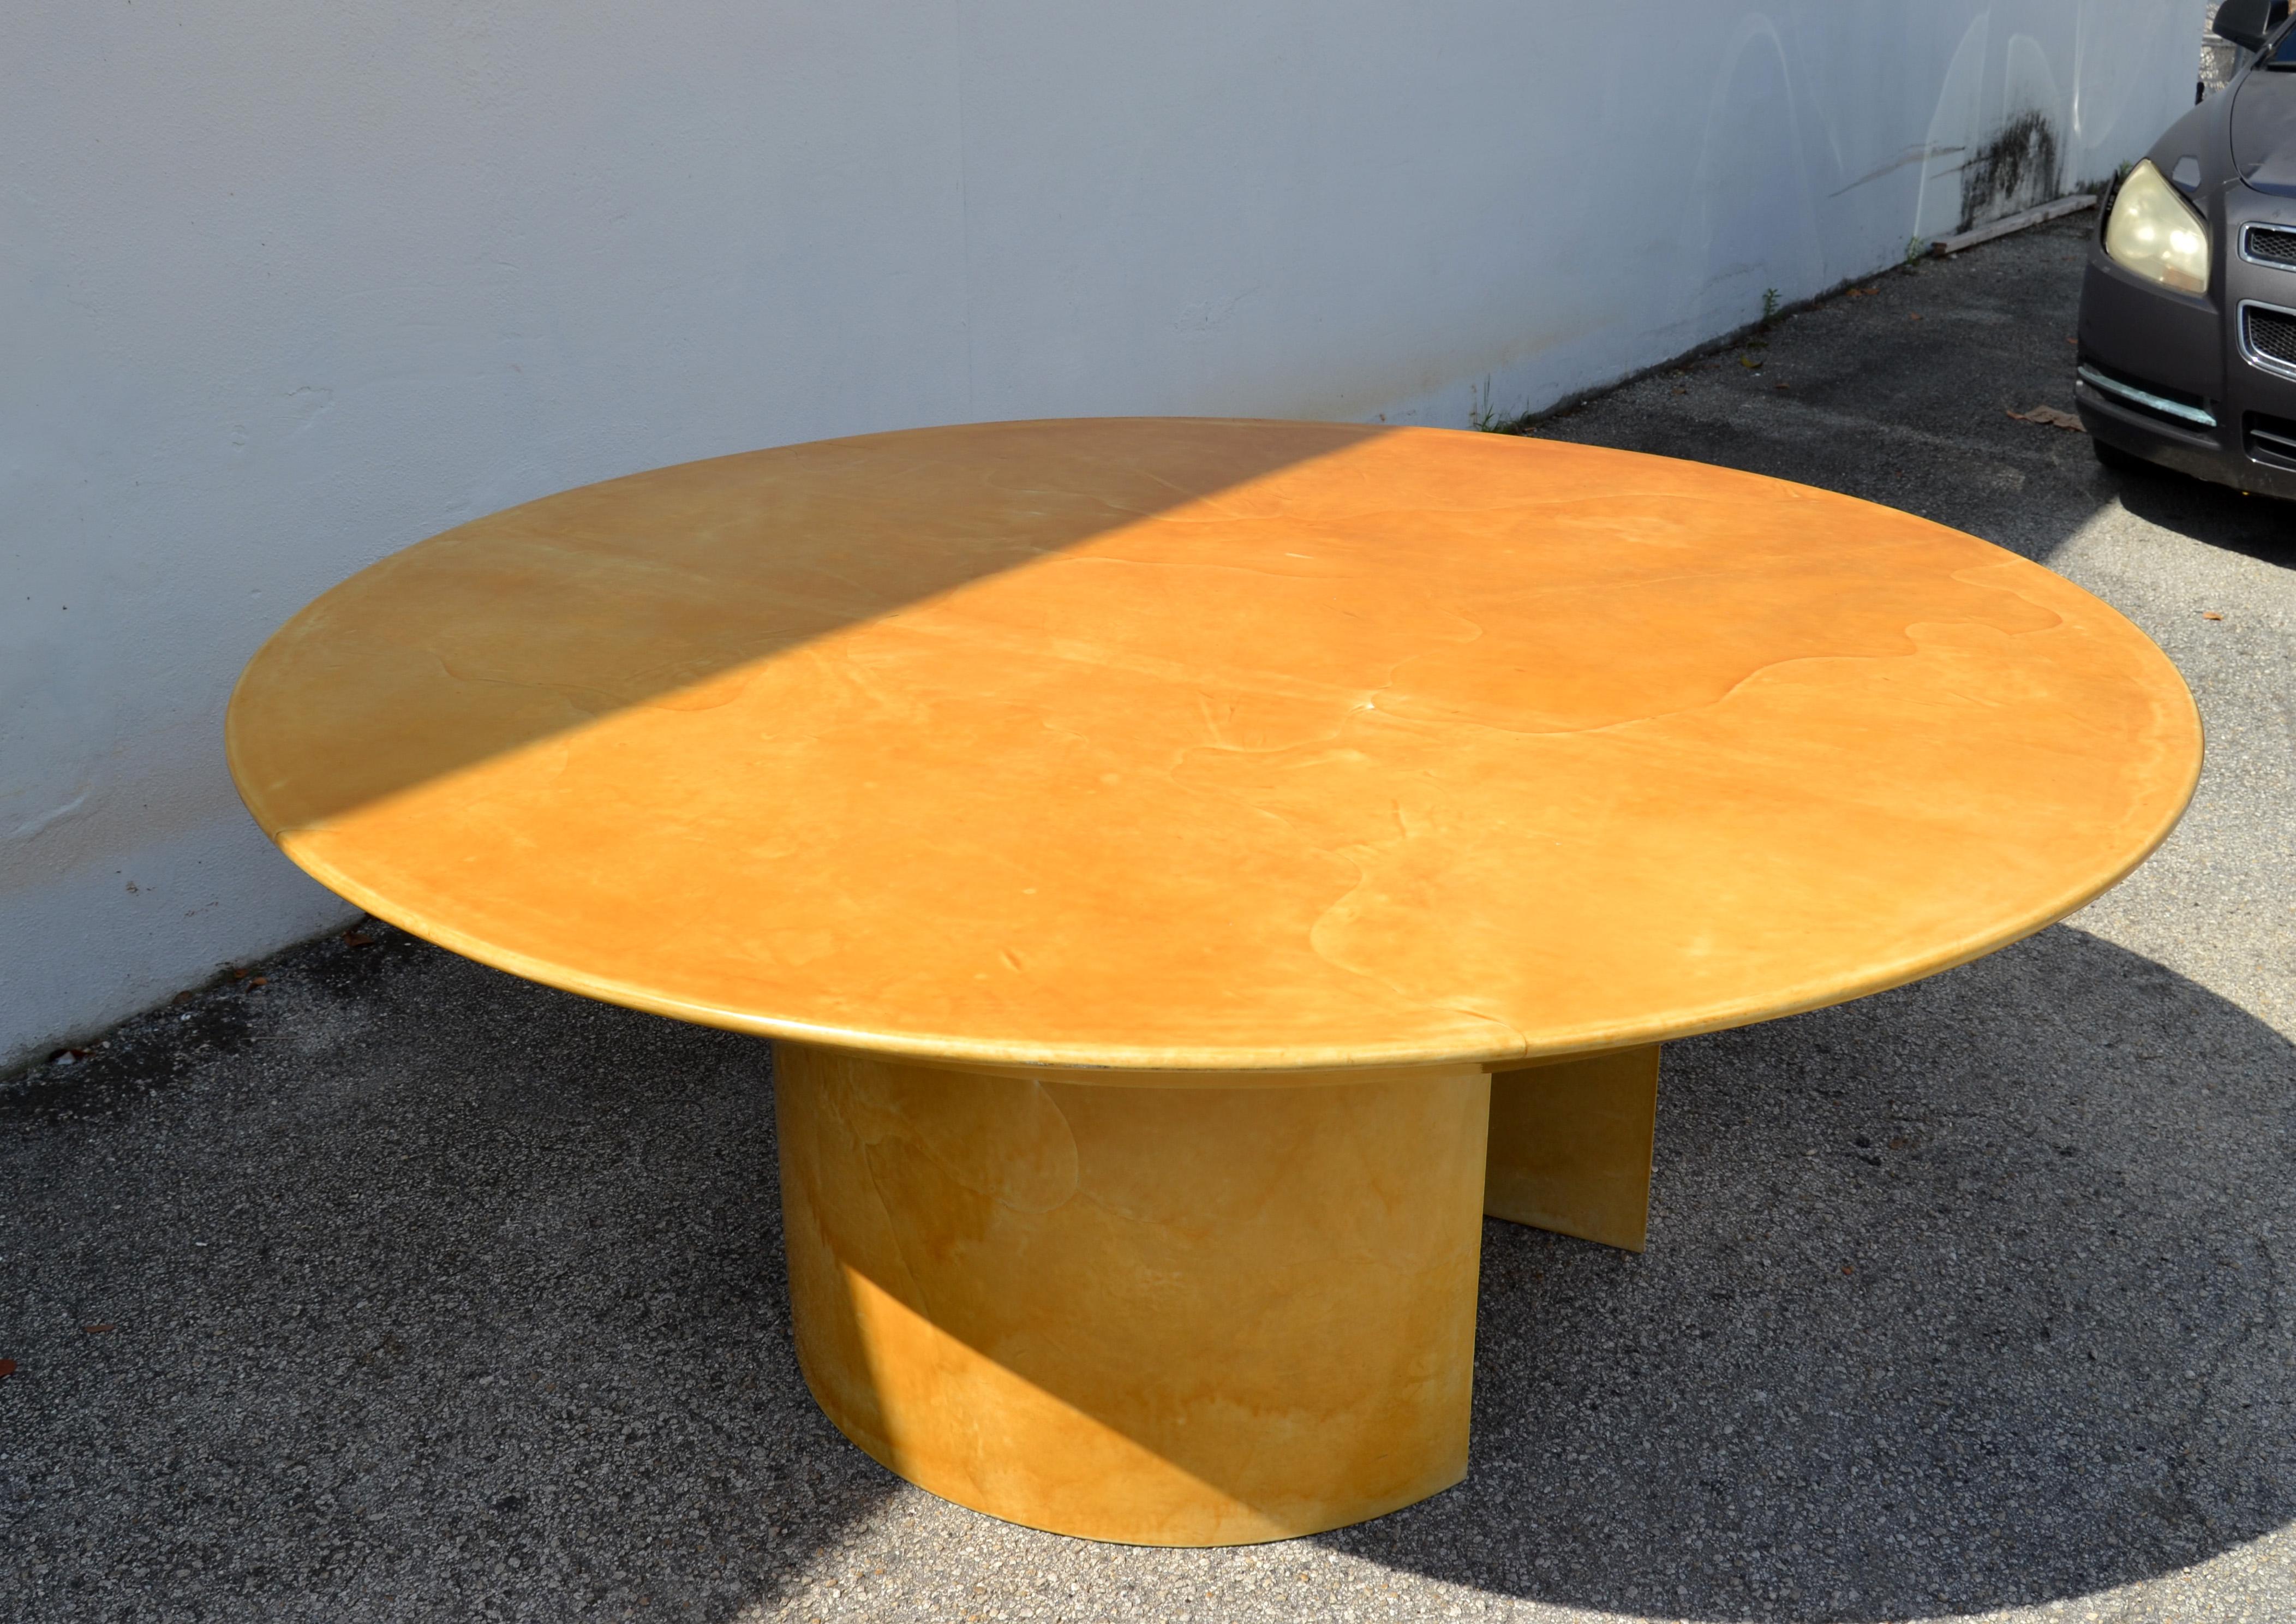 Goatskin Karl Spring Mid-Century Modern Lacquered Goat Skin Dining, Conference Table 70s For Sale